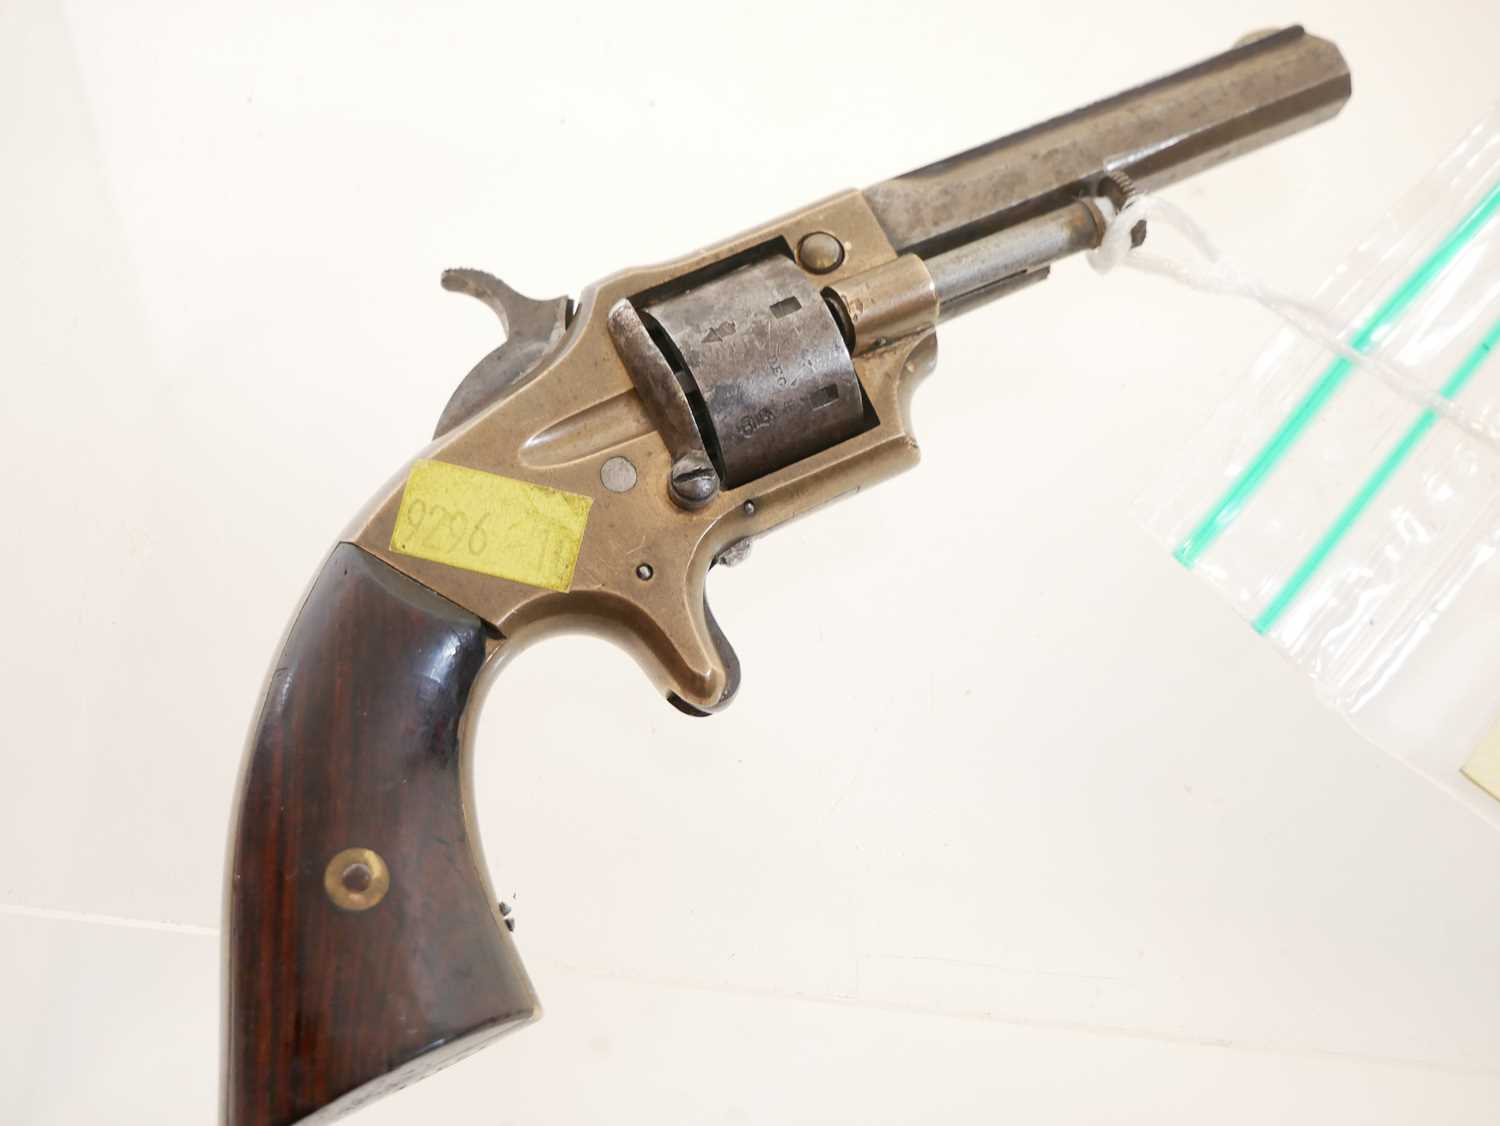 Deactivated Smith and Wesson .22 rimfire revolver - Image 7 of 7